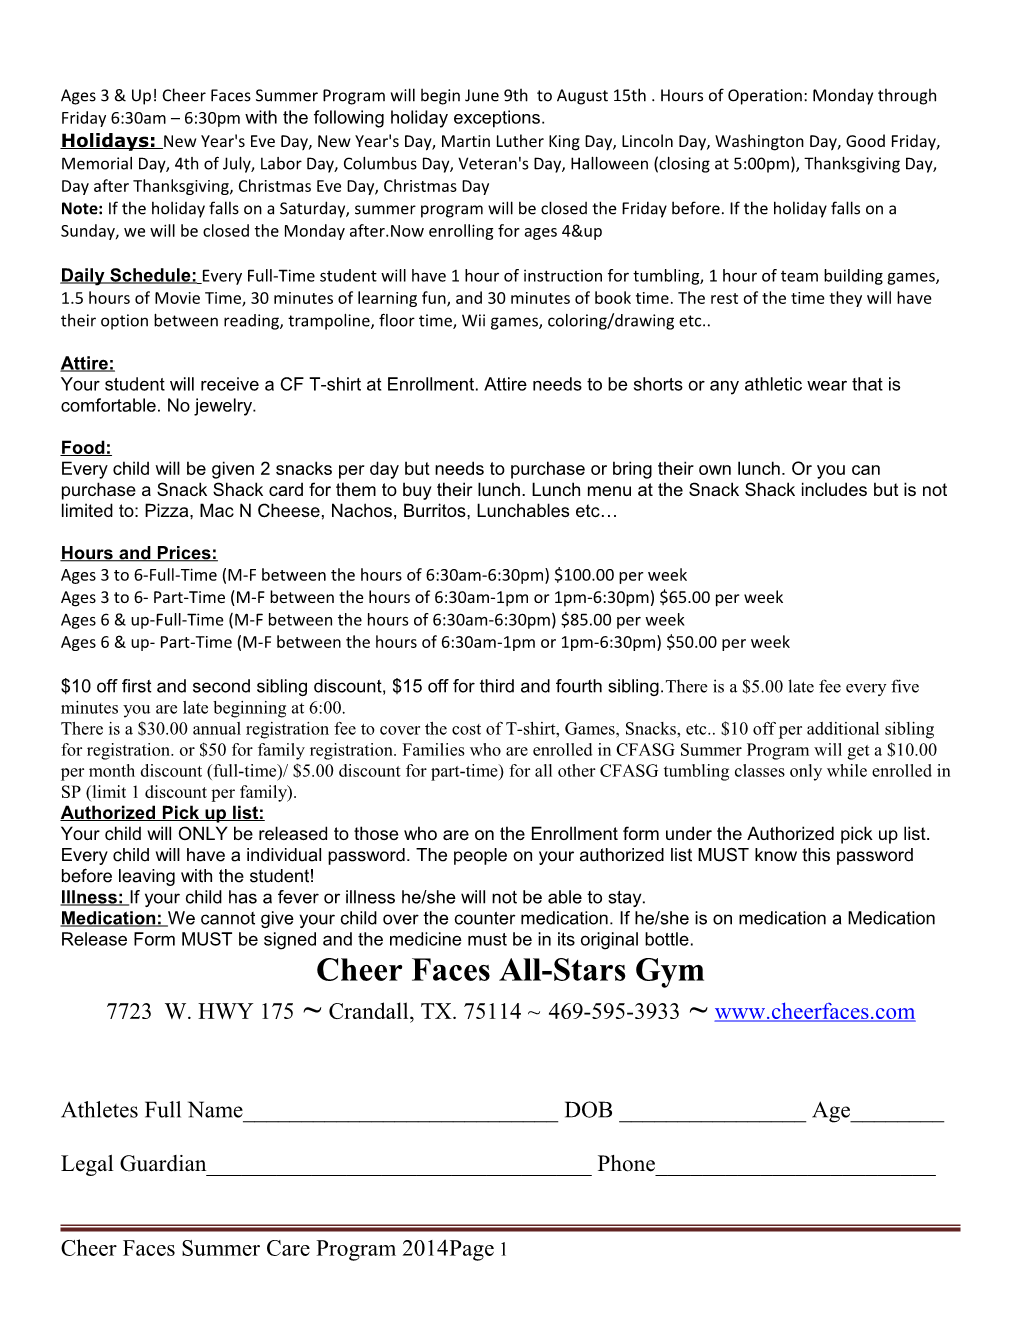 Ages 3 & Up! Cheer Faces Summer Program Will Begin June 9Th to August 15Th . Hours of Operation